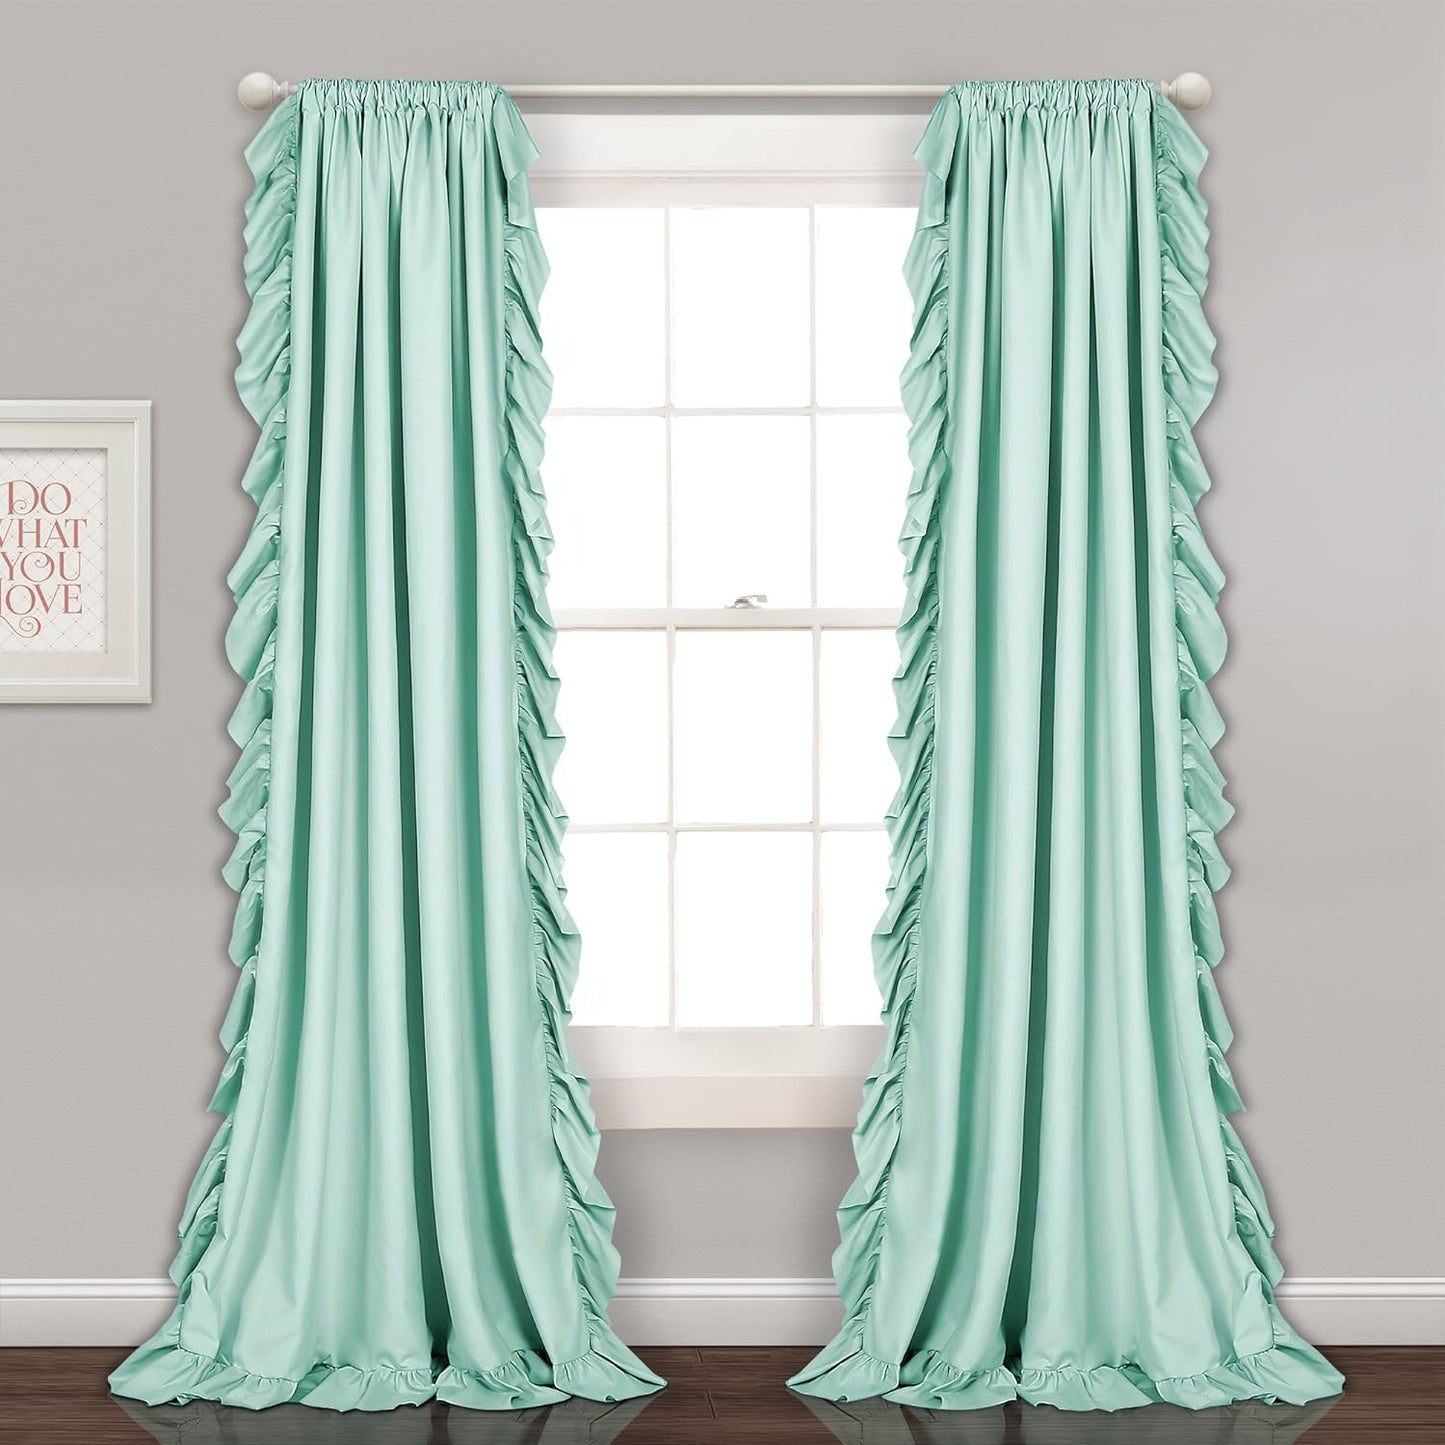 Reyna Ruffle Window Curtain Panel Set for Living, Dining, Bedroom (Pair), 54"W X 84"L, Light Blue